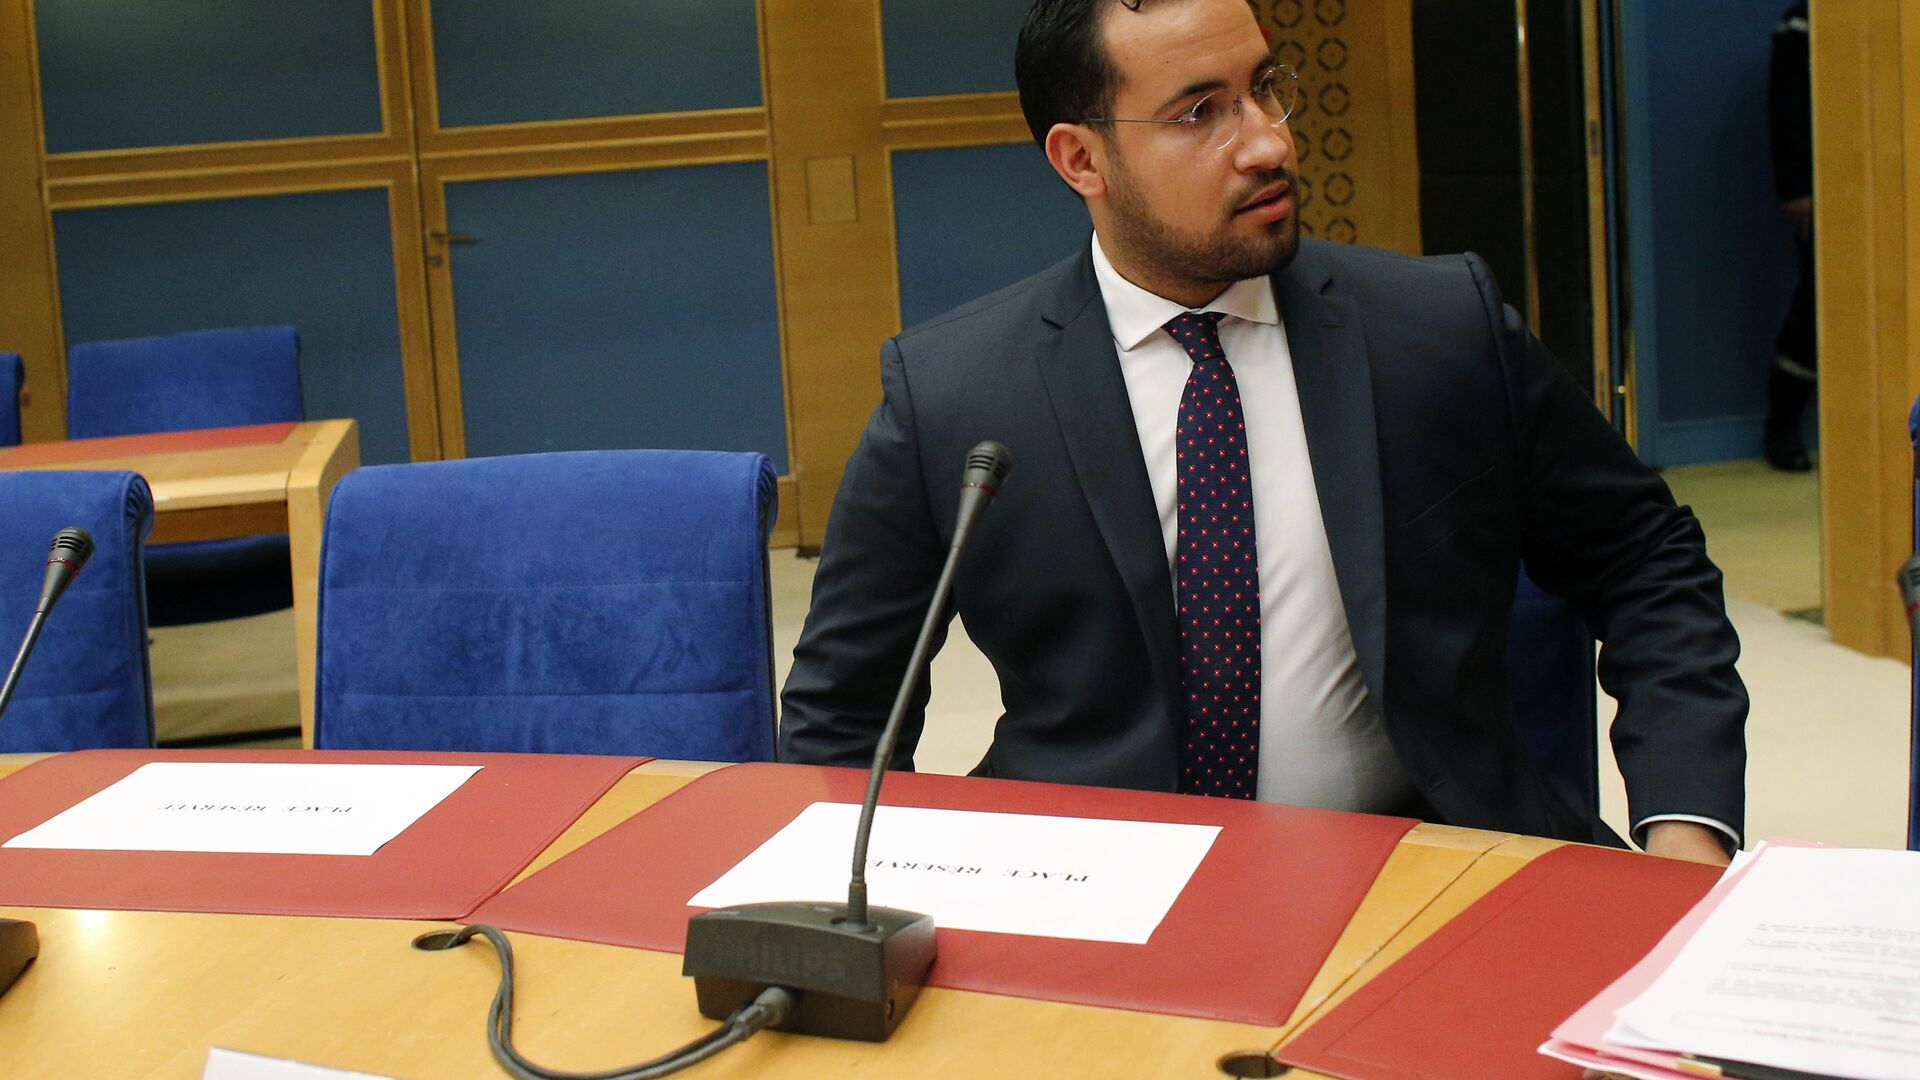 Former President Macron's security aide Alexandre Benalla, left, appears before the French Senate Laws Commission prior to his hearing, in Paris, France, Wednesday, Sept. 19, 2018. - Sputnik Afrique, 1920, 16.12.2021